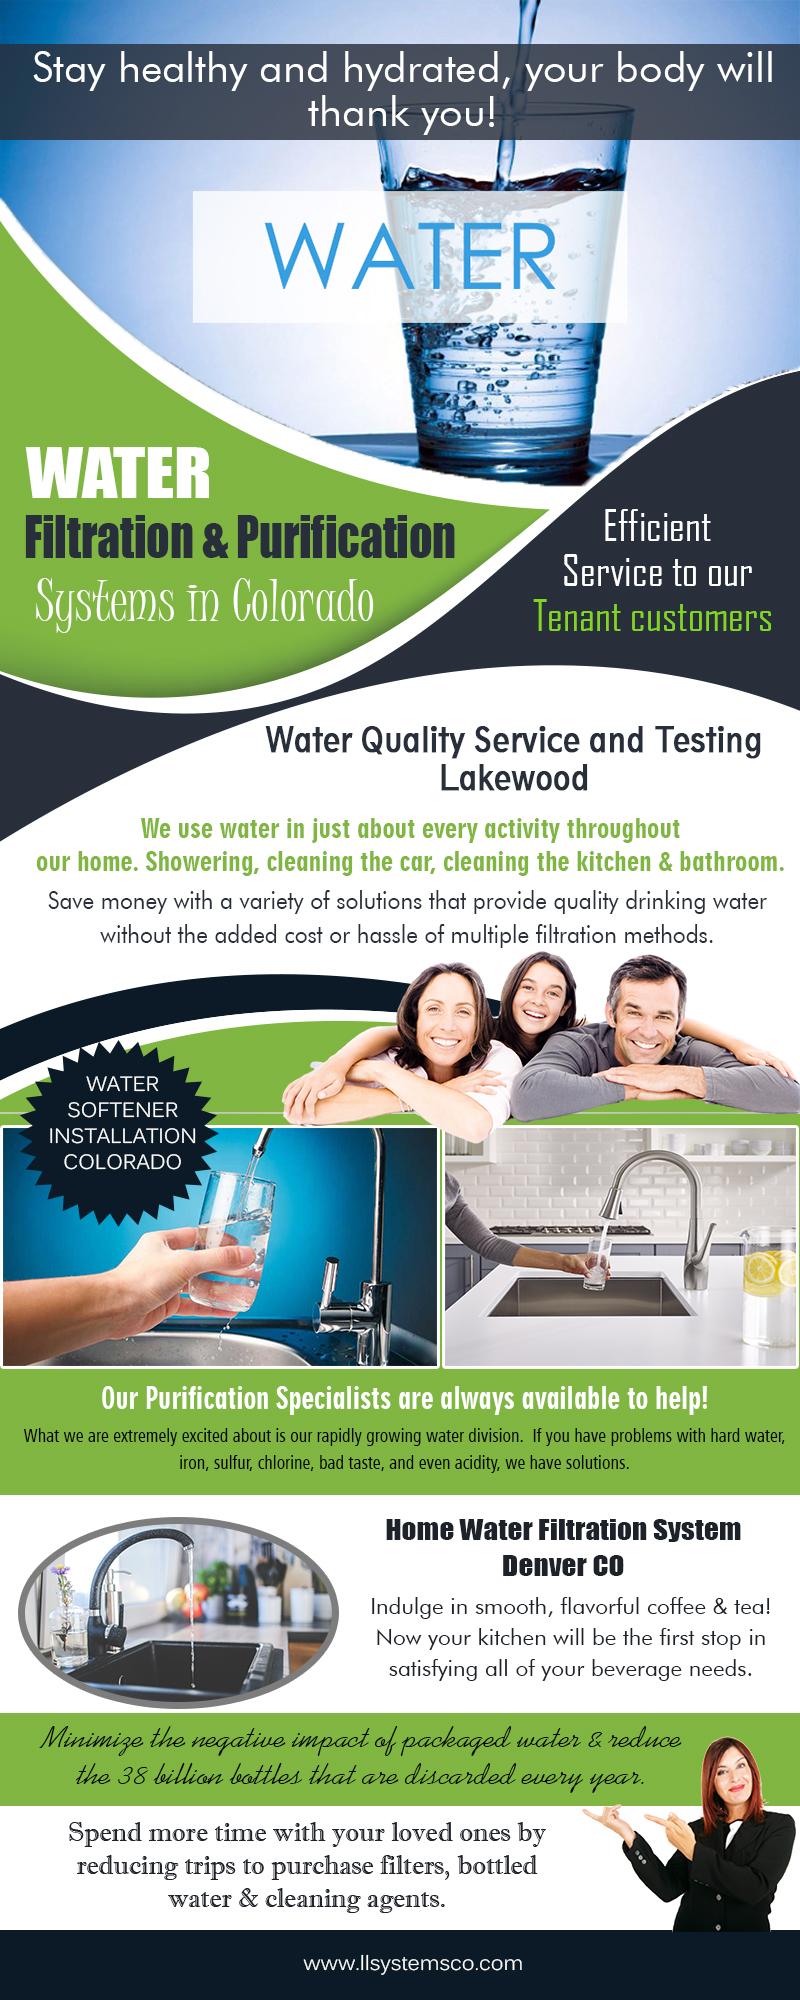 Water Filtration & Purification Systems in Colorado